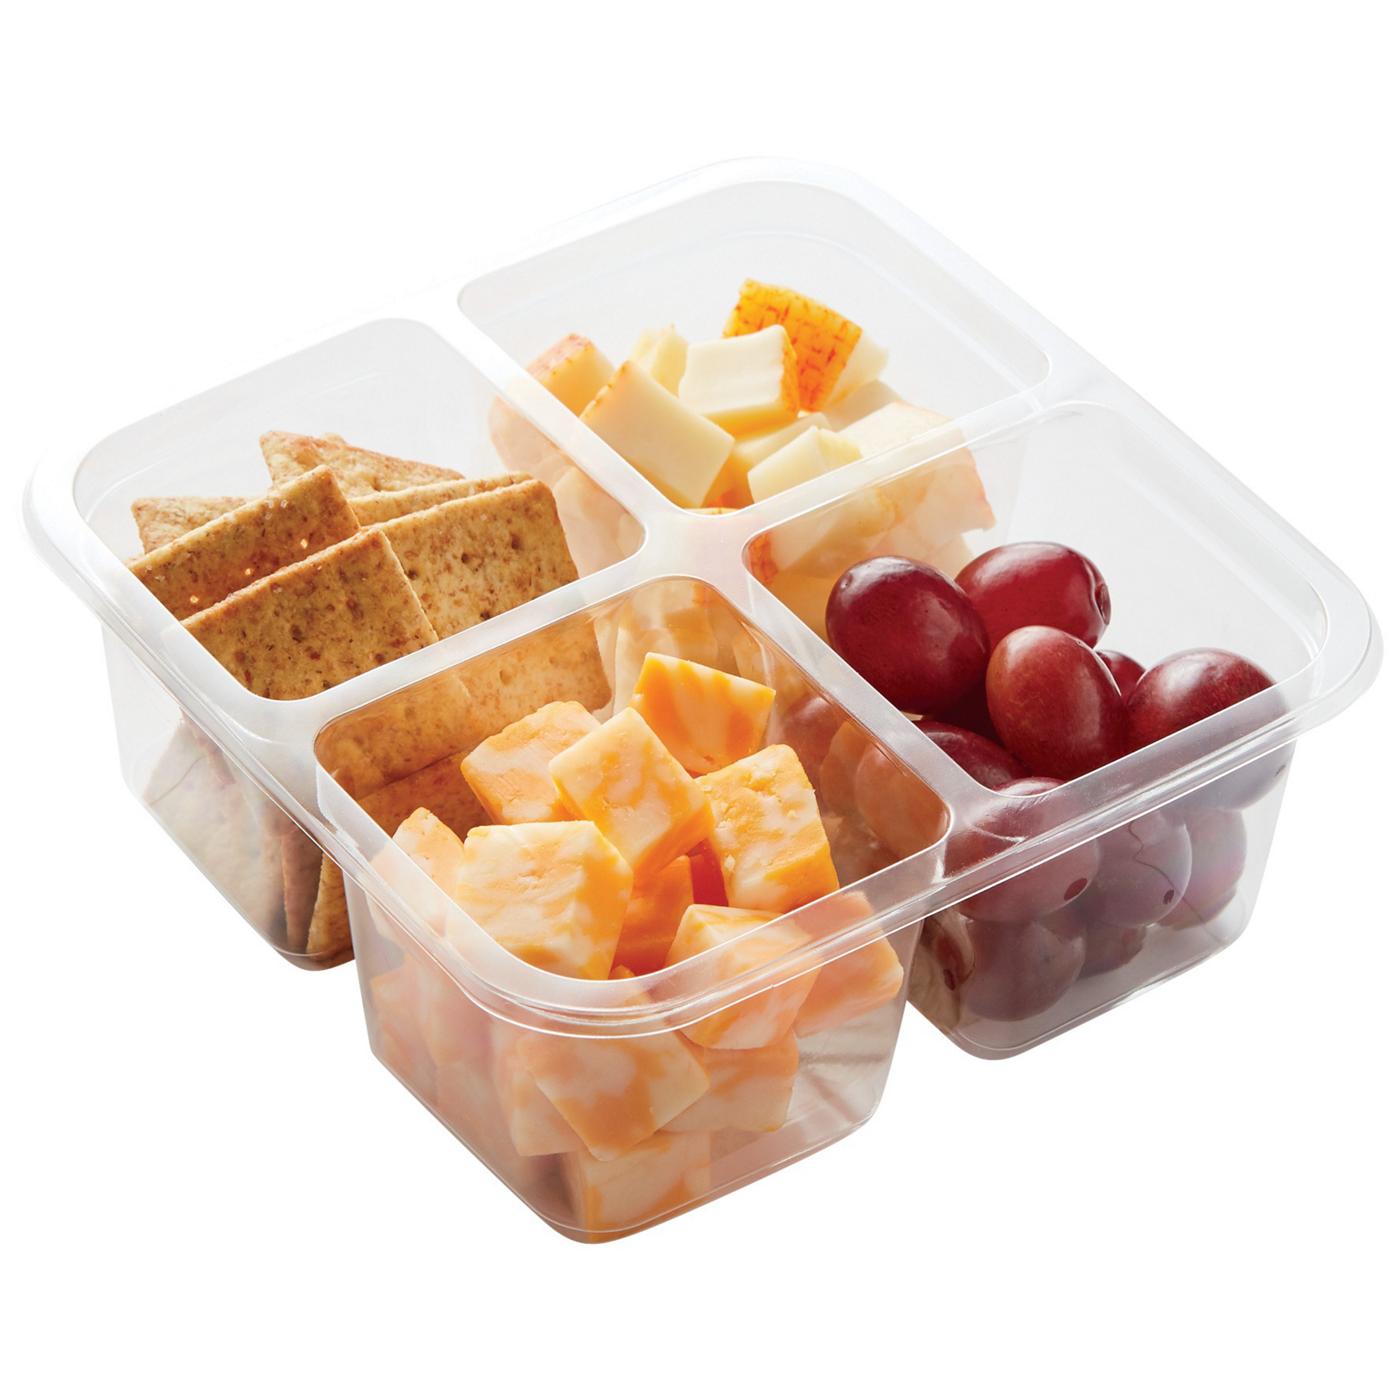 Meal Simple by H-E-B Snack Tray - Cheese, Wheat Crisps & Grapes; image 1 of 4